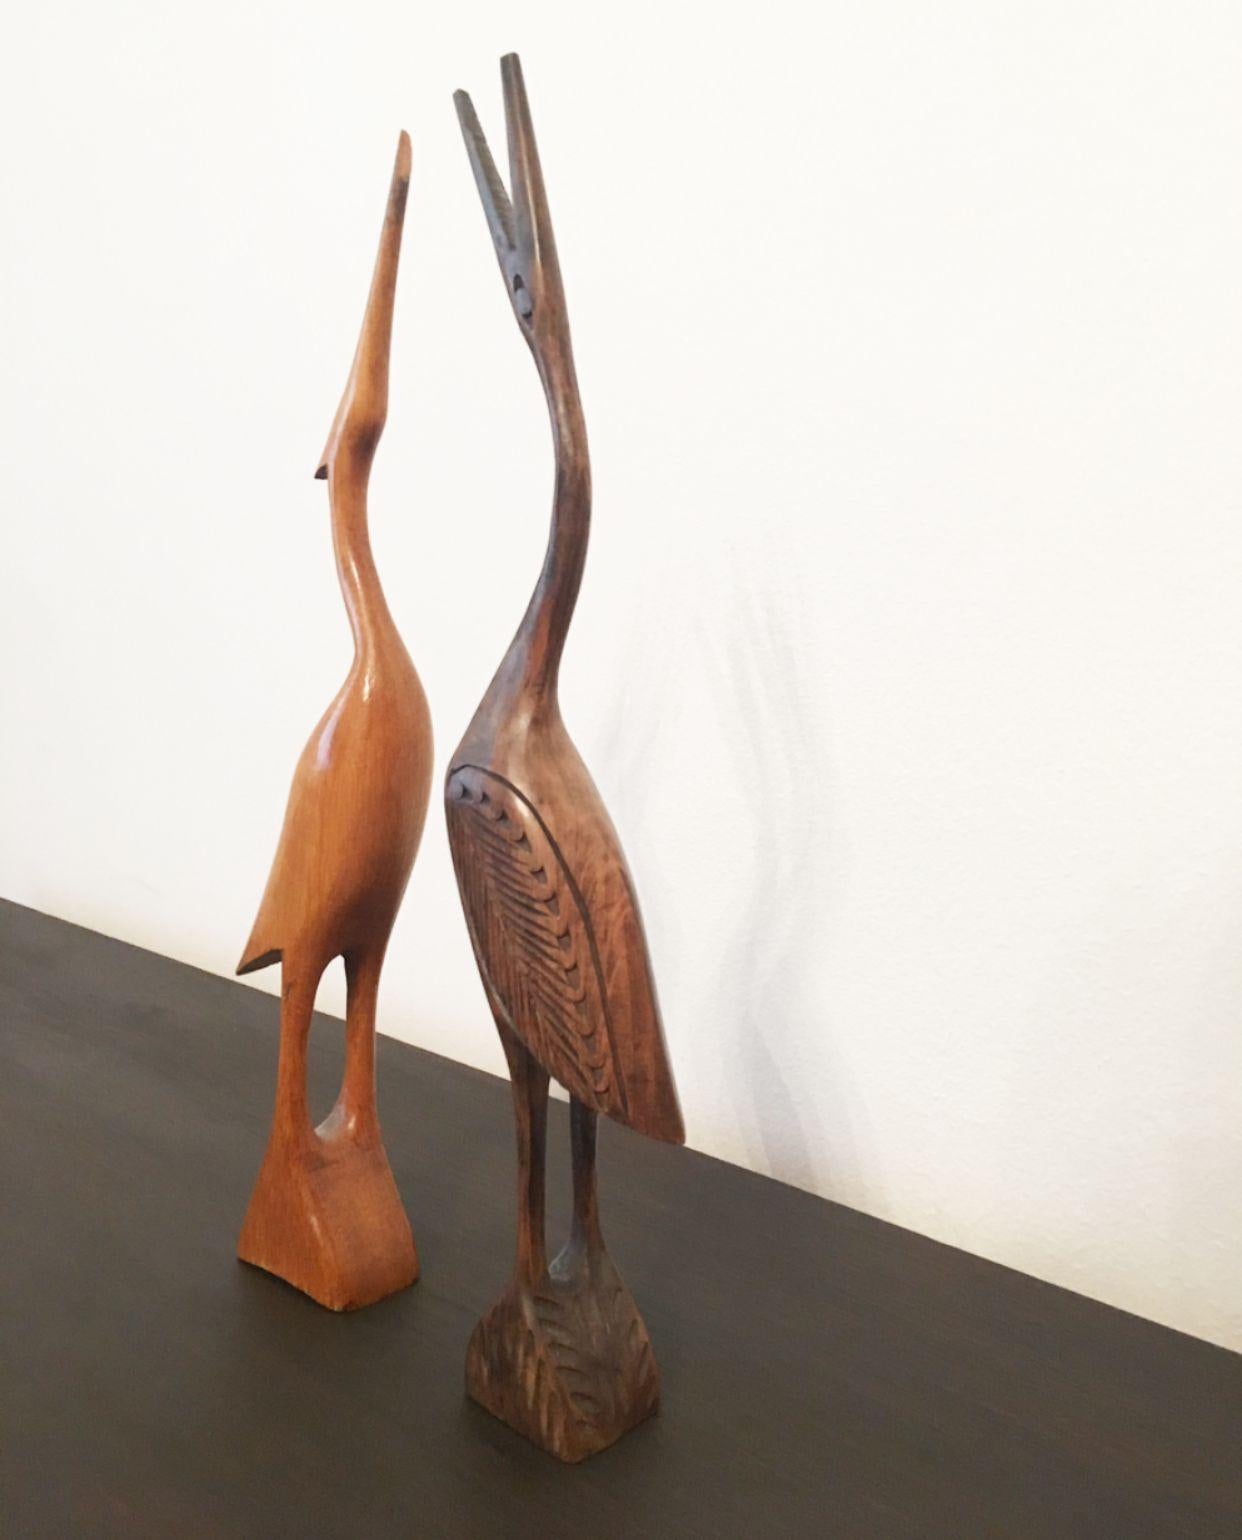 Two wooden statues of a bird with slim legs, Czechoslovakia, 1970s. Unknown artist.
Dimensions:
Height 39 cm
Width 10 cm
Depth 5 cm
Material: wood.